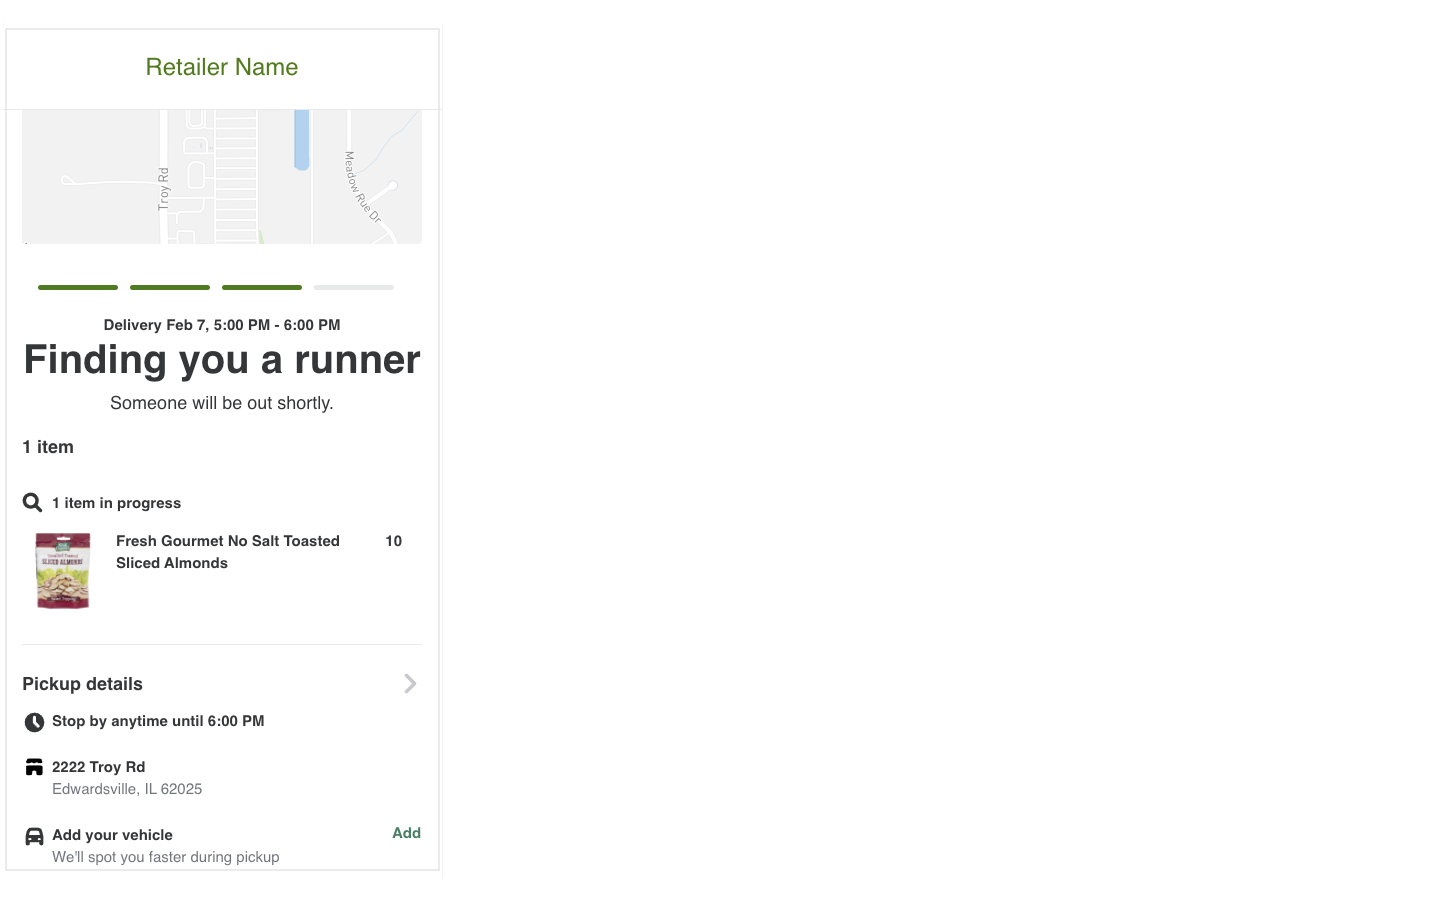 The image shows the title &quot;Finding you a runner&quot; and the text &quot;Someone will be out shortly.&quot;